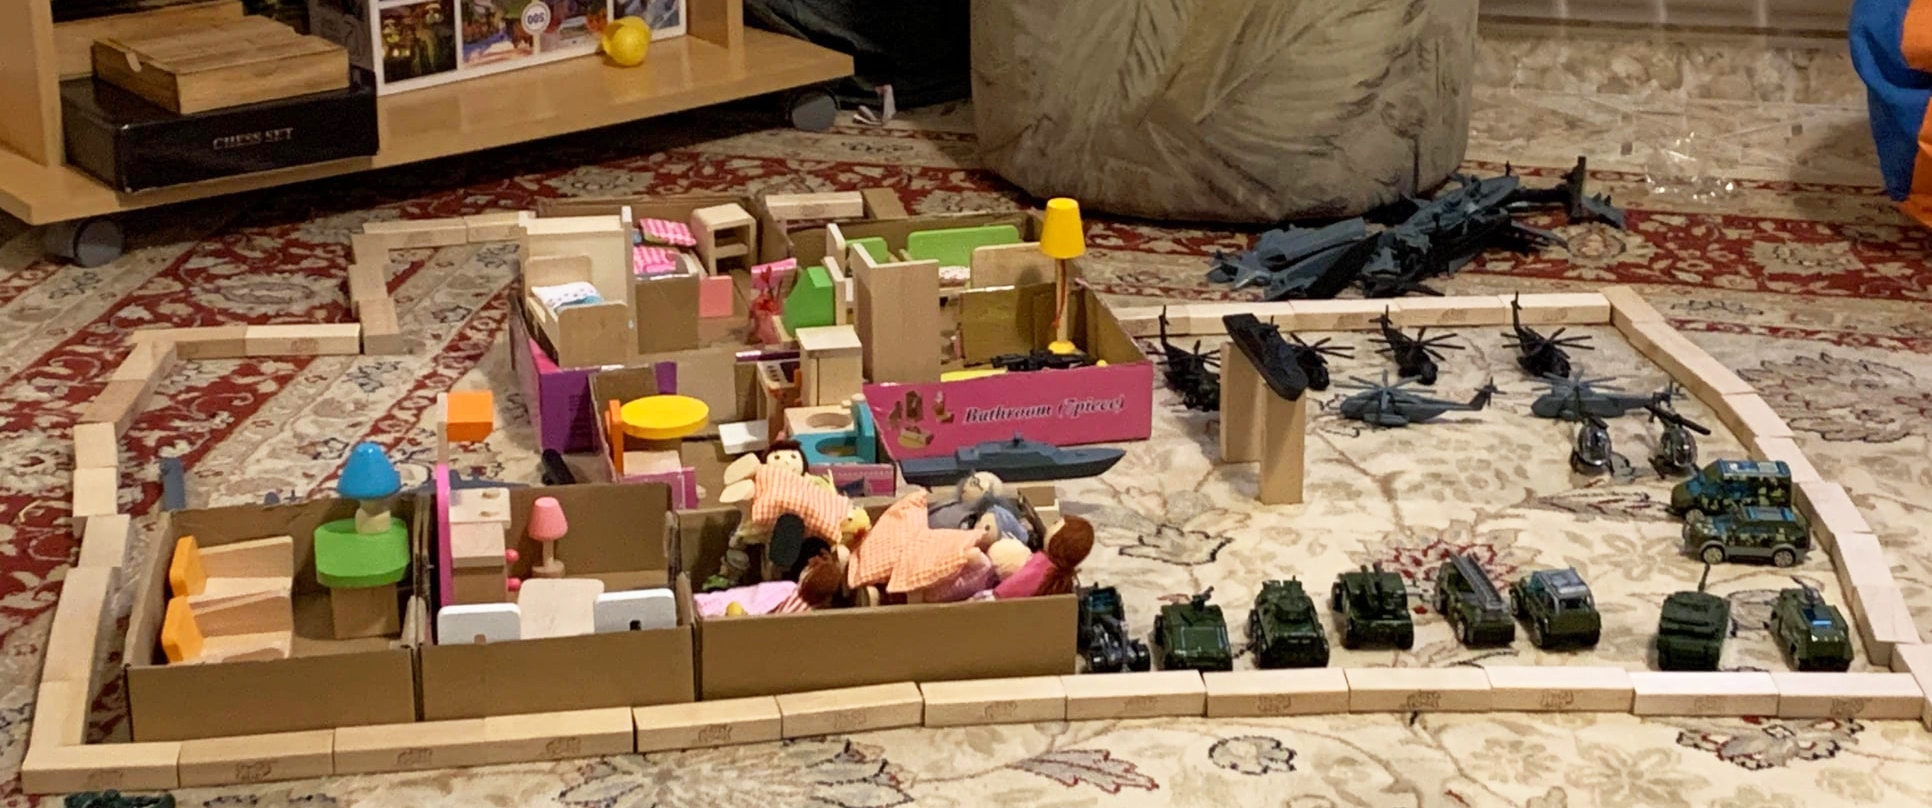 During play therapy, the children construct a scene showing the Ukrainian army guarding people huddled in one room.